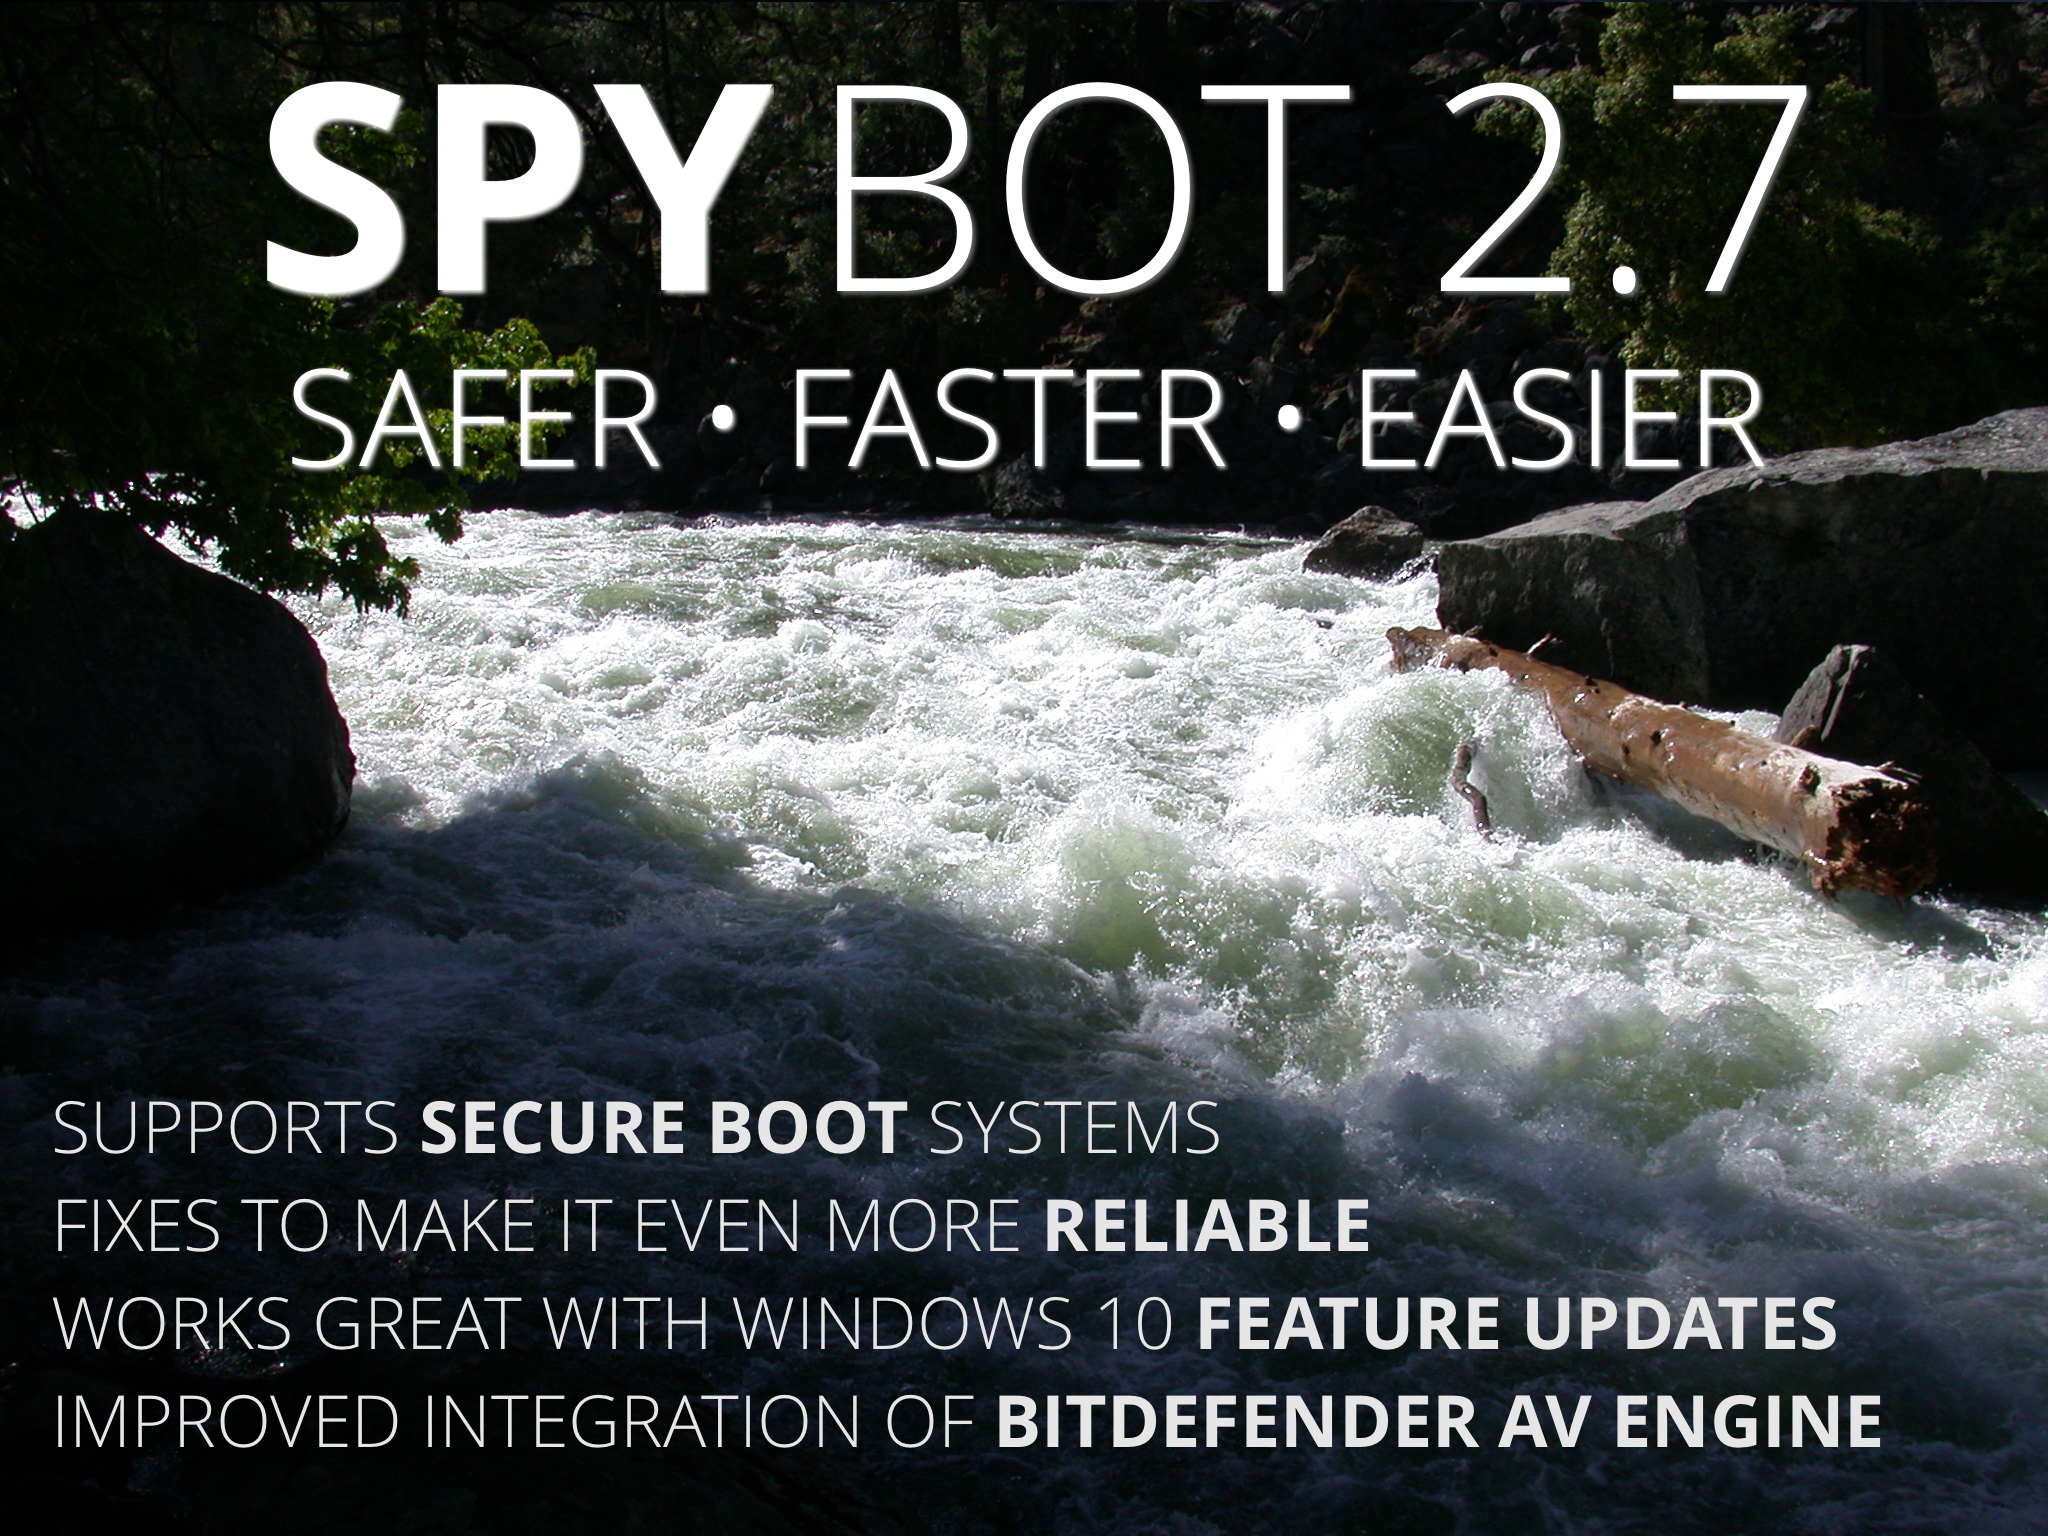 cnet spybot search and destroy